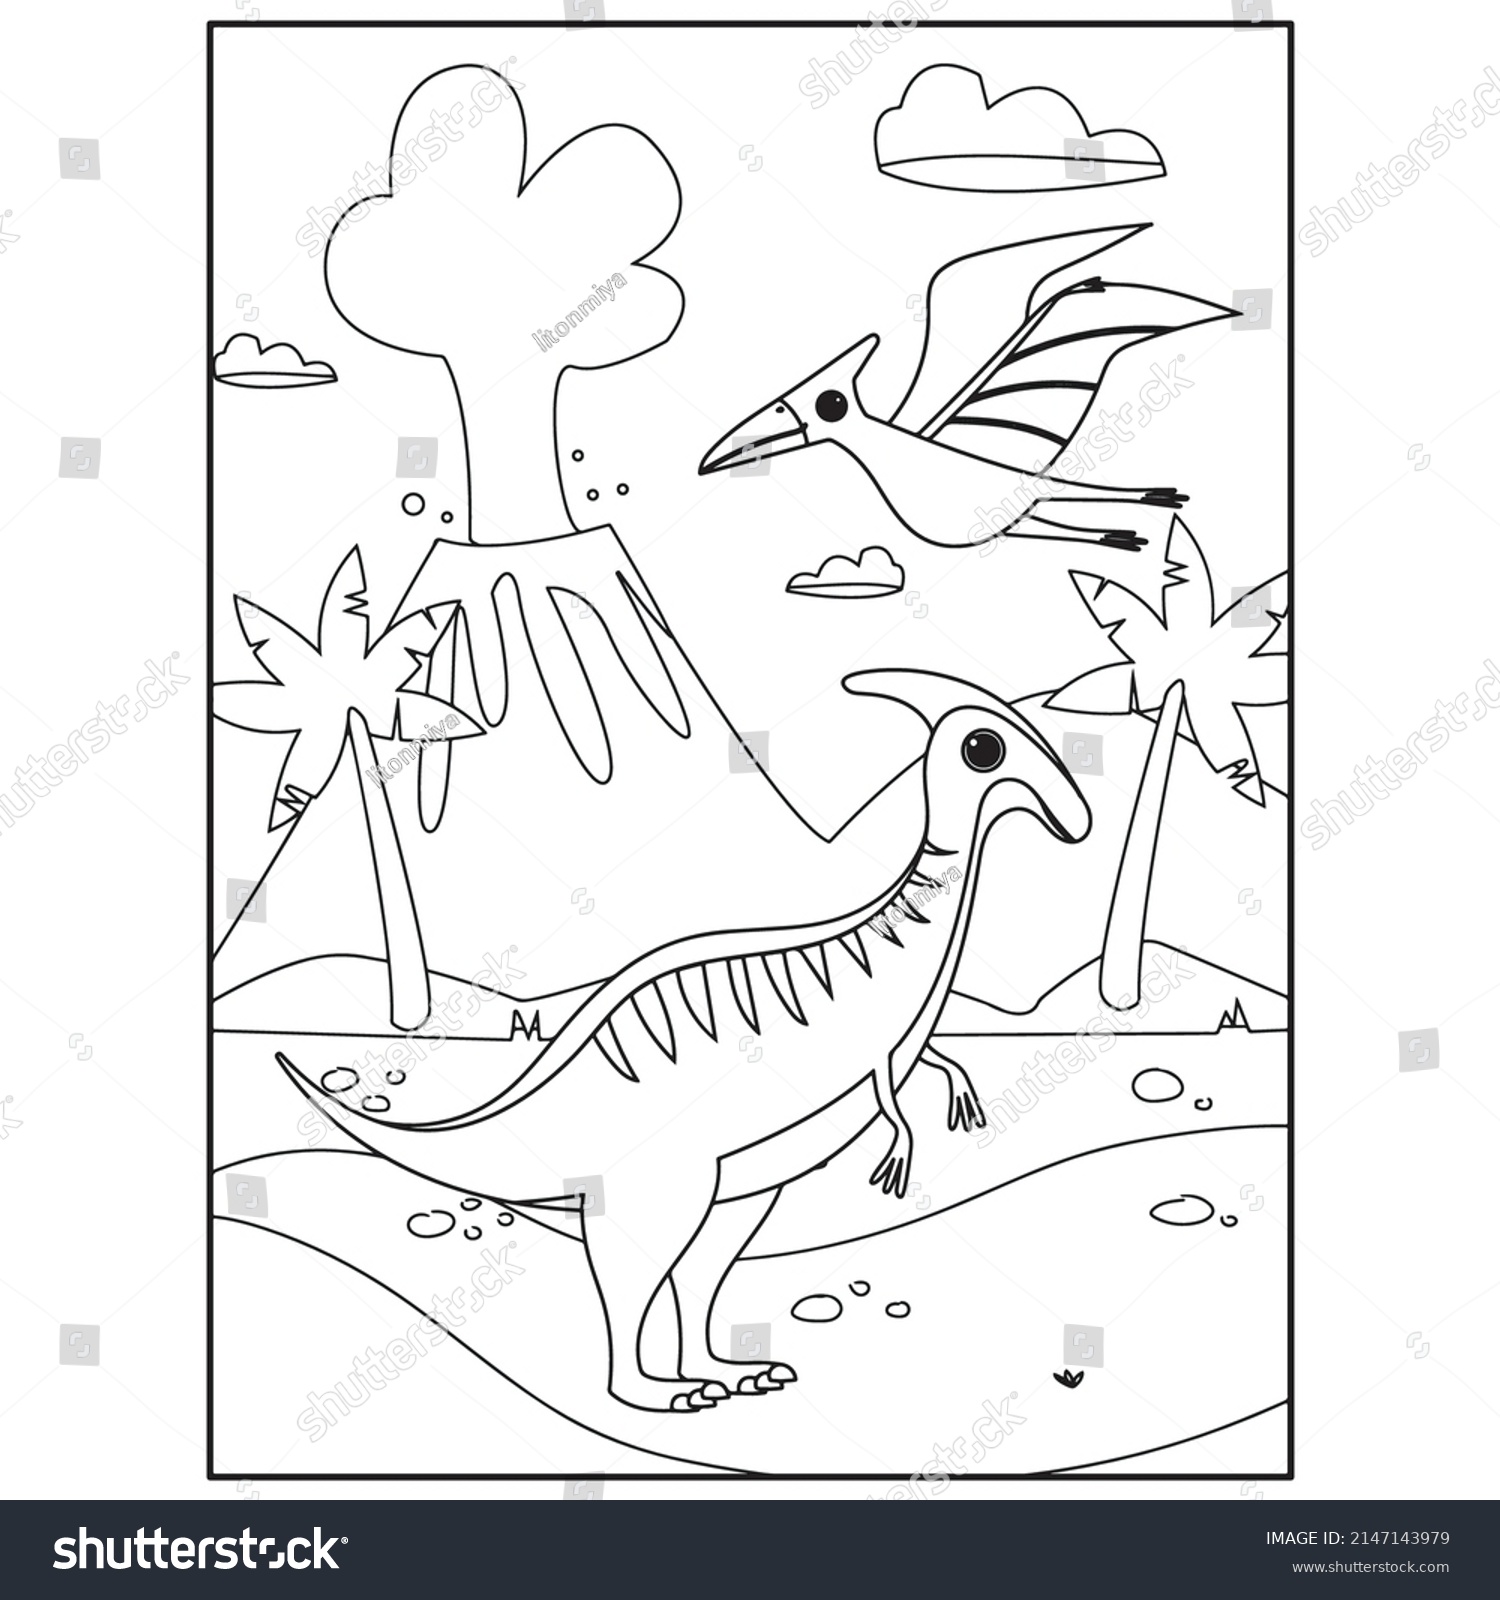 Dinosaur Coloring Pages Kids Stock Vector (Royalty Free) 2147143979